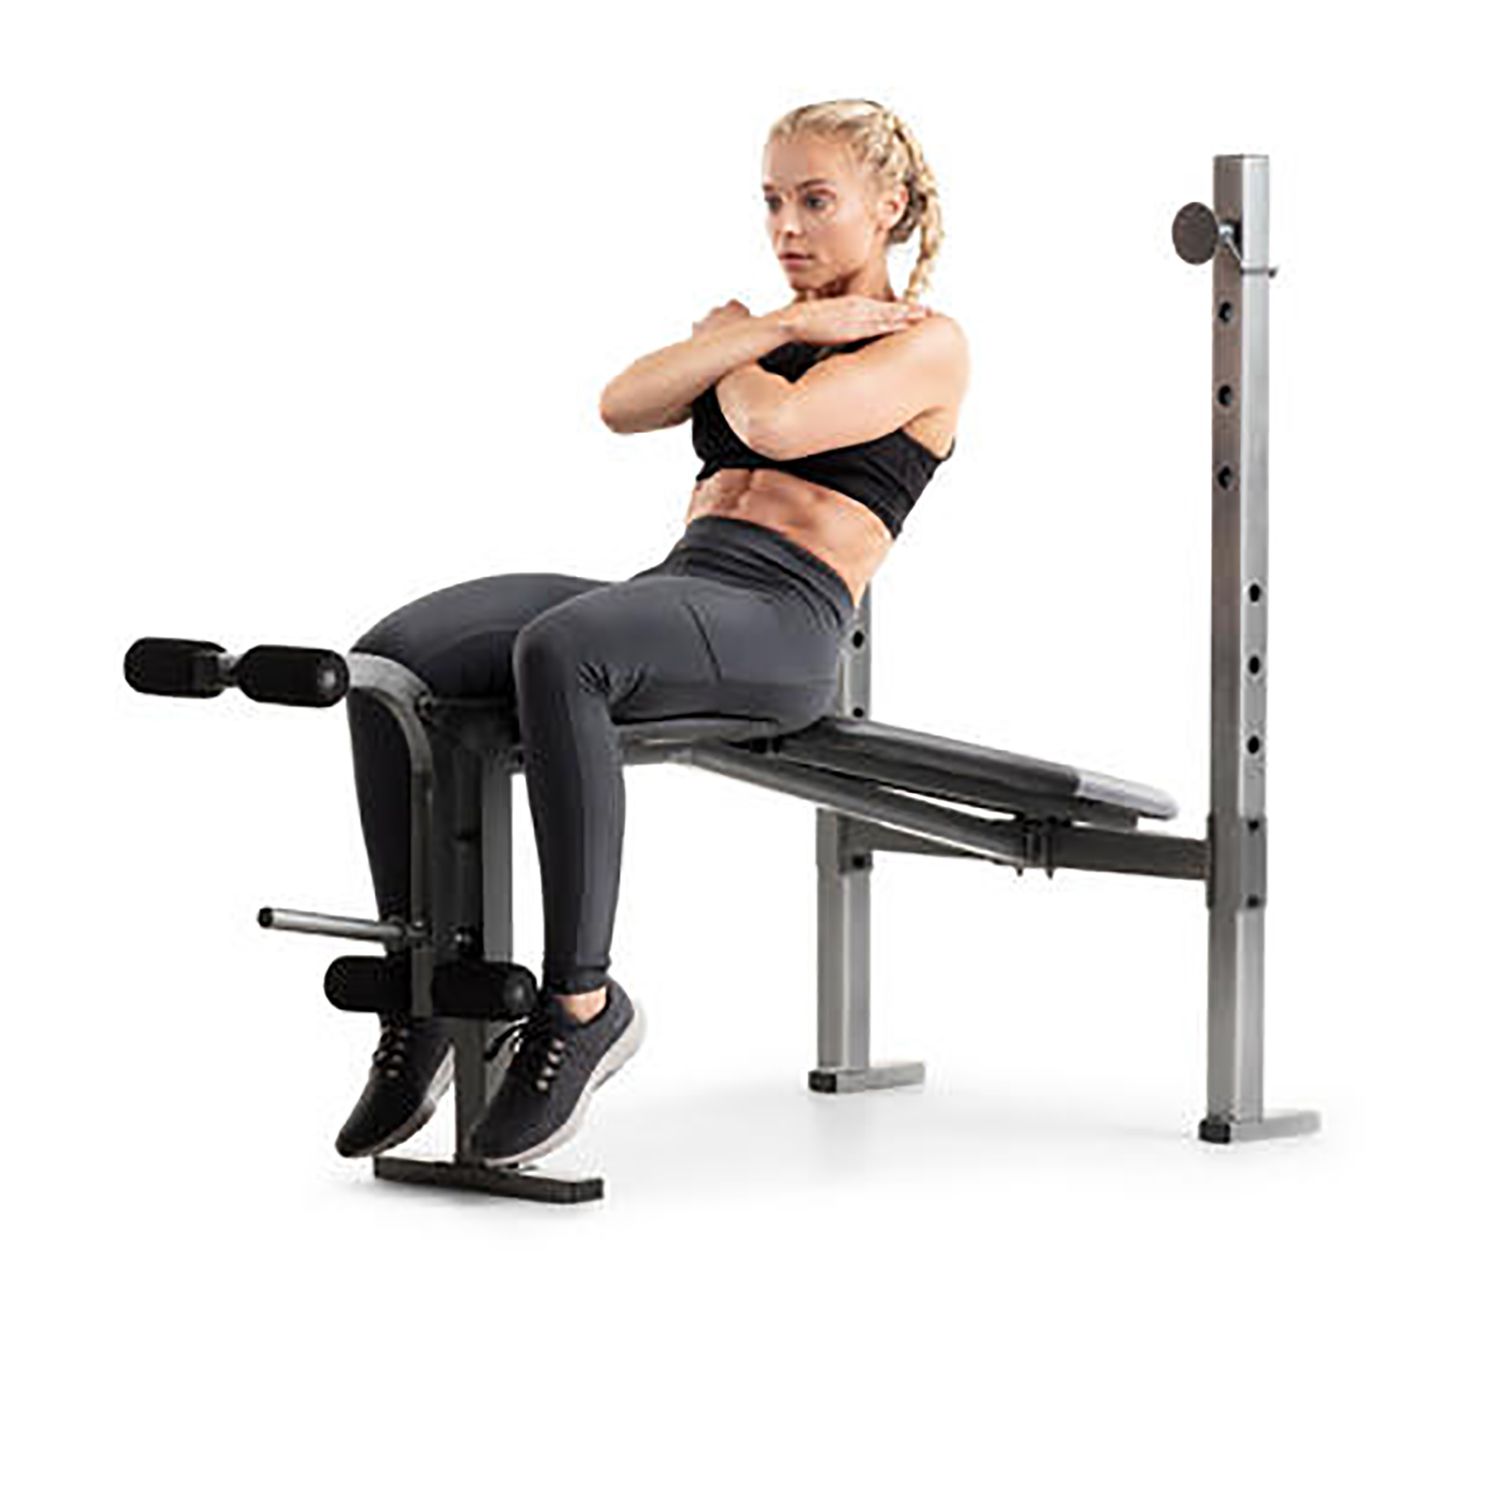 Details about   Cyber Monday Weight Bench Set Adjustable Press Lifting Barbell Exercise Workout